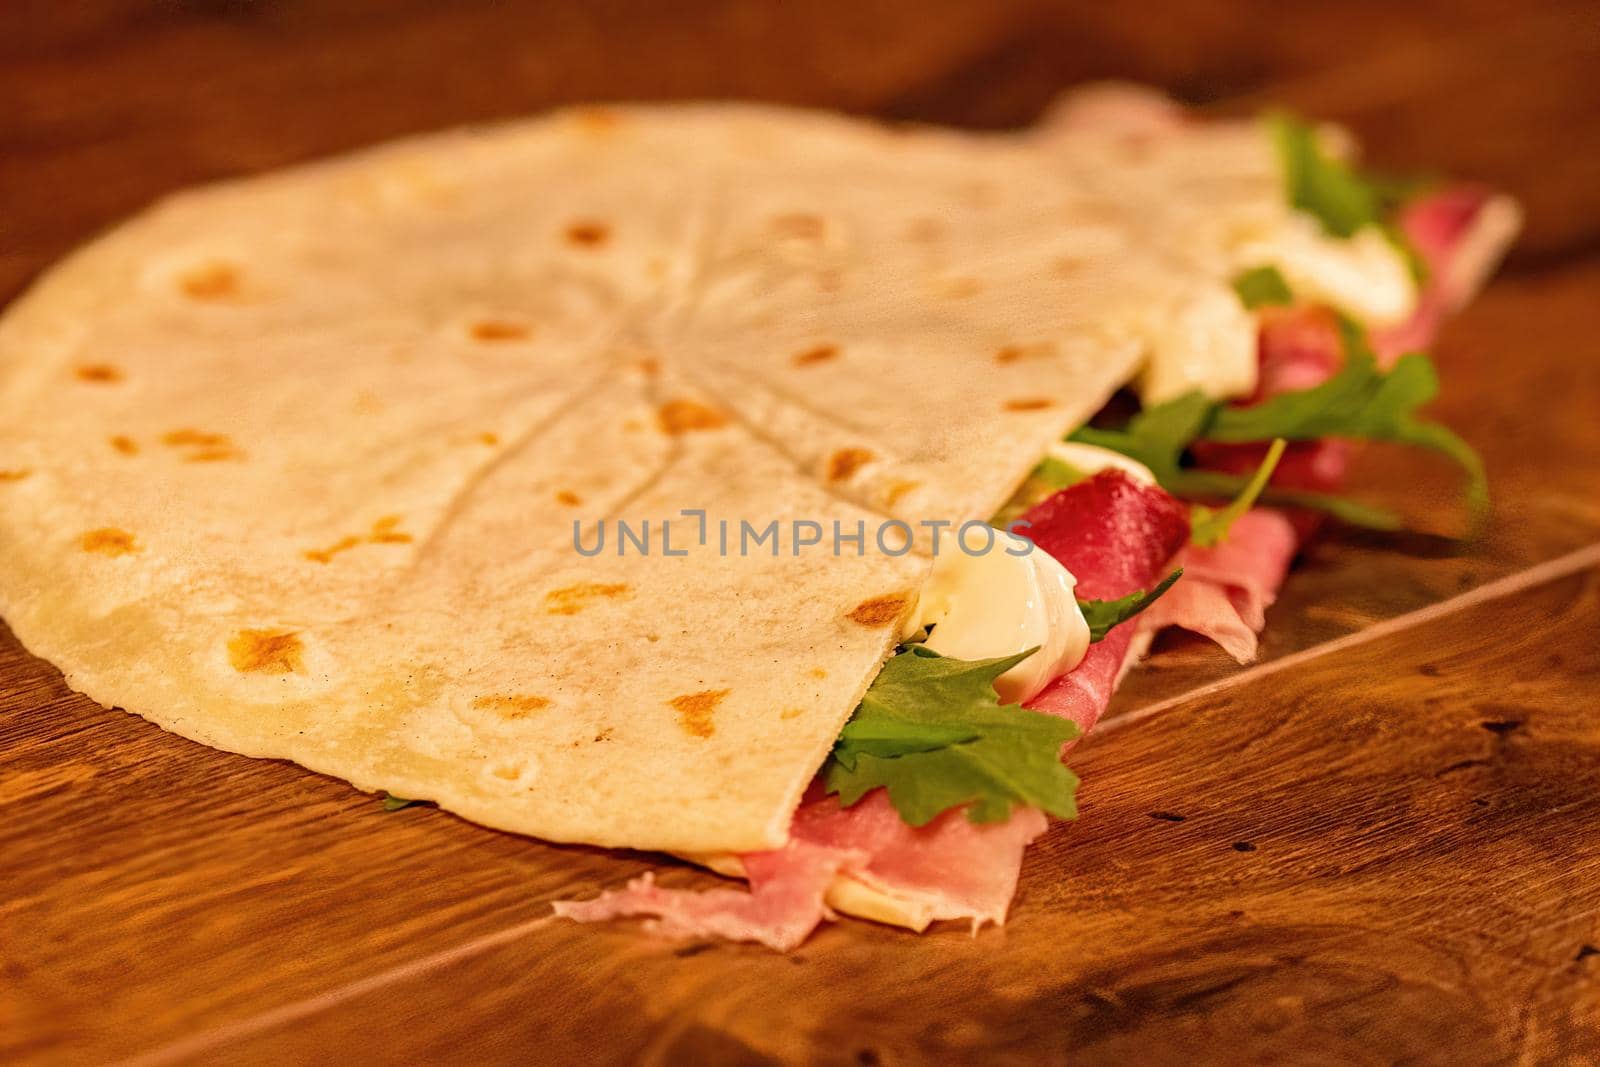 salty piadina with cured meats and vegetables on a wooden surface